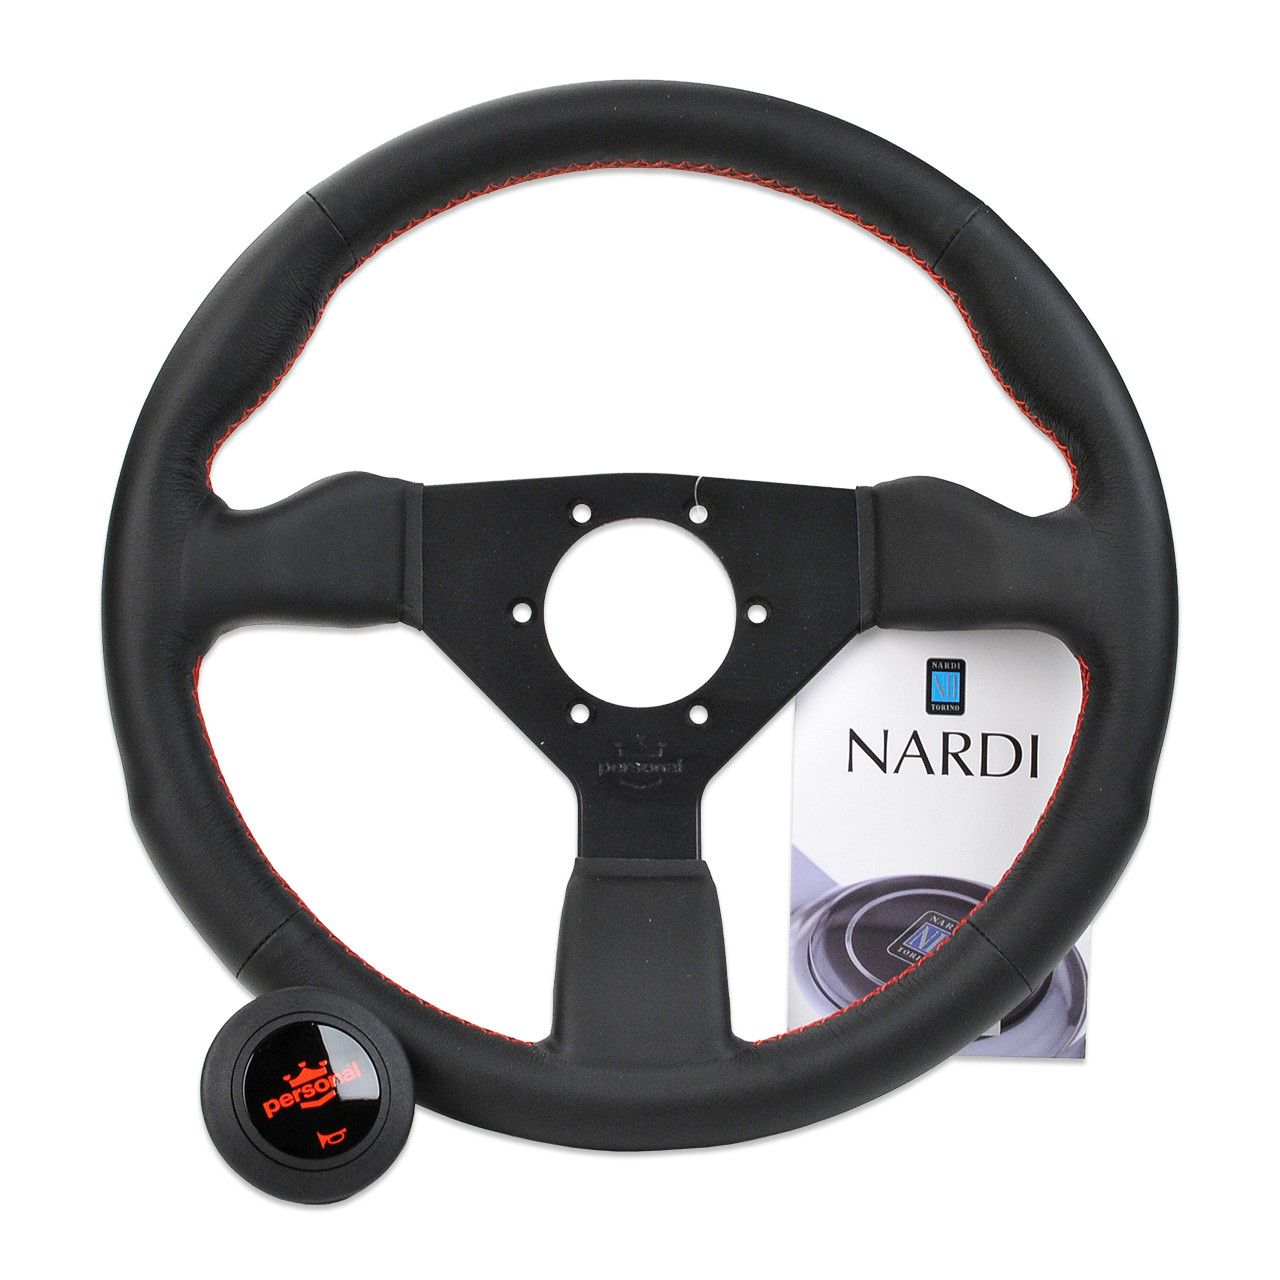 Personal Neo Grinta 330 Steering Wheel in Black Leather with Red Stitching